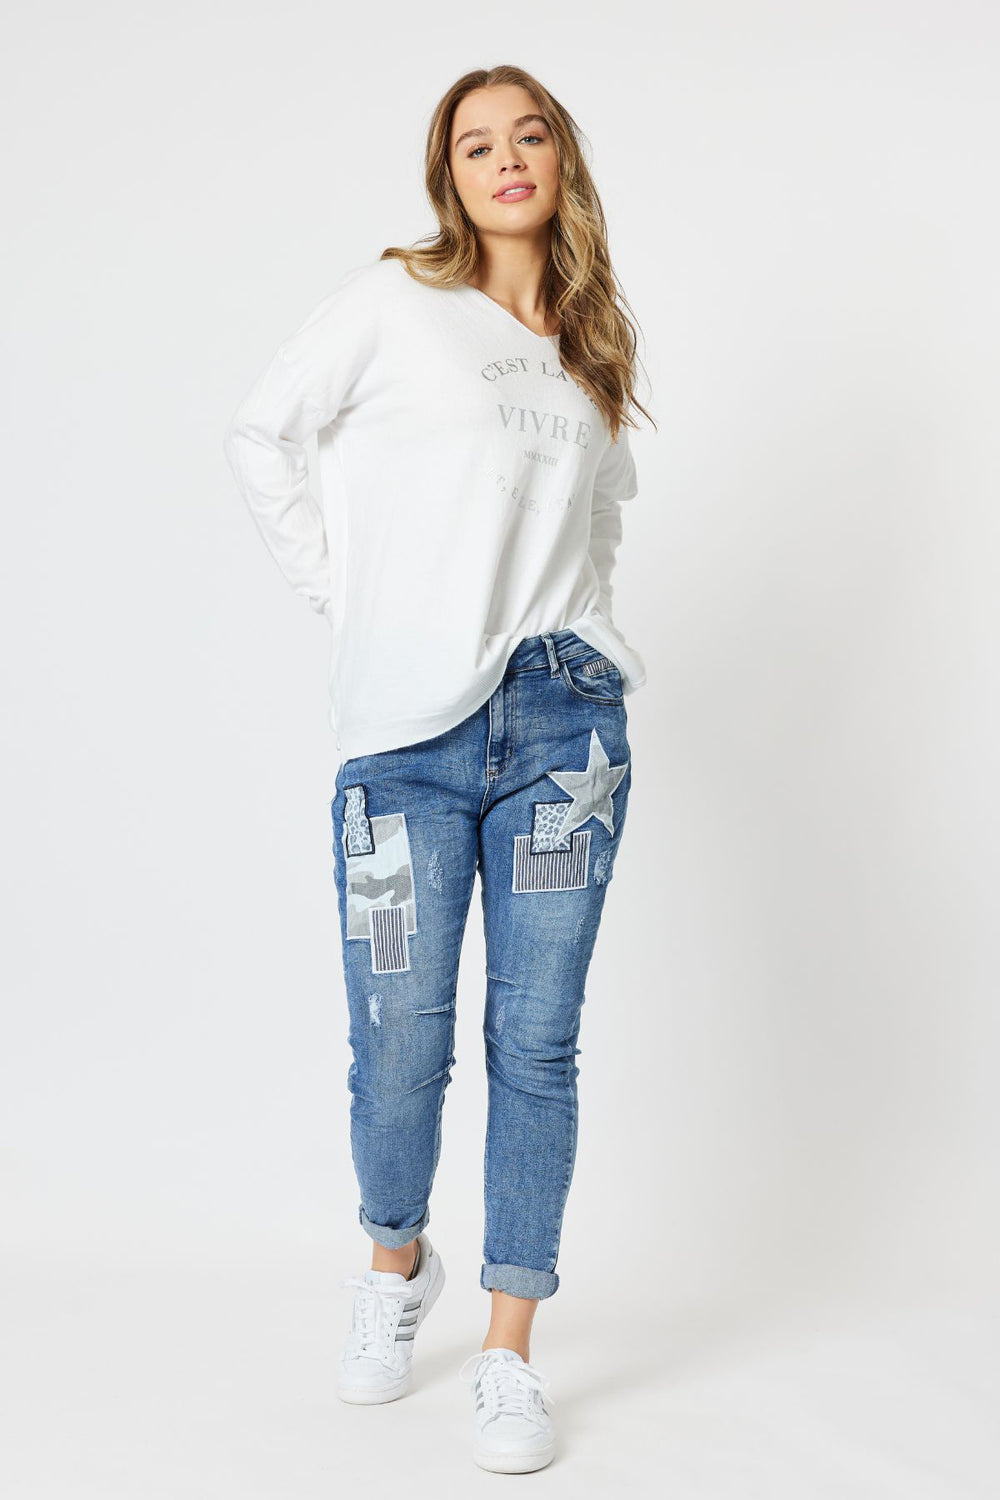 Looking for your next pair of jeans, look no further than the Stella Patch Jean by Threadz. Featuring a fun patchwork on the front, slim leg, zip fly with a mid - high rise. Wear full length or roll them up for a cuffed look. Super comfy and easy to wear!  Brand : Threadz Style Code : 42897 Fabric : 98 % Cotton 2% Elastane This garment is designed to fade lose colour Cold machine wash  Classic 5 pocket denim design Washed denim look Mid - High rise Slim leg fit Stretch fit